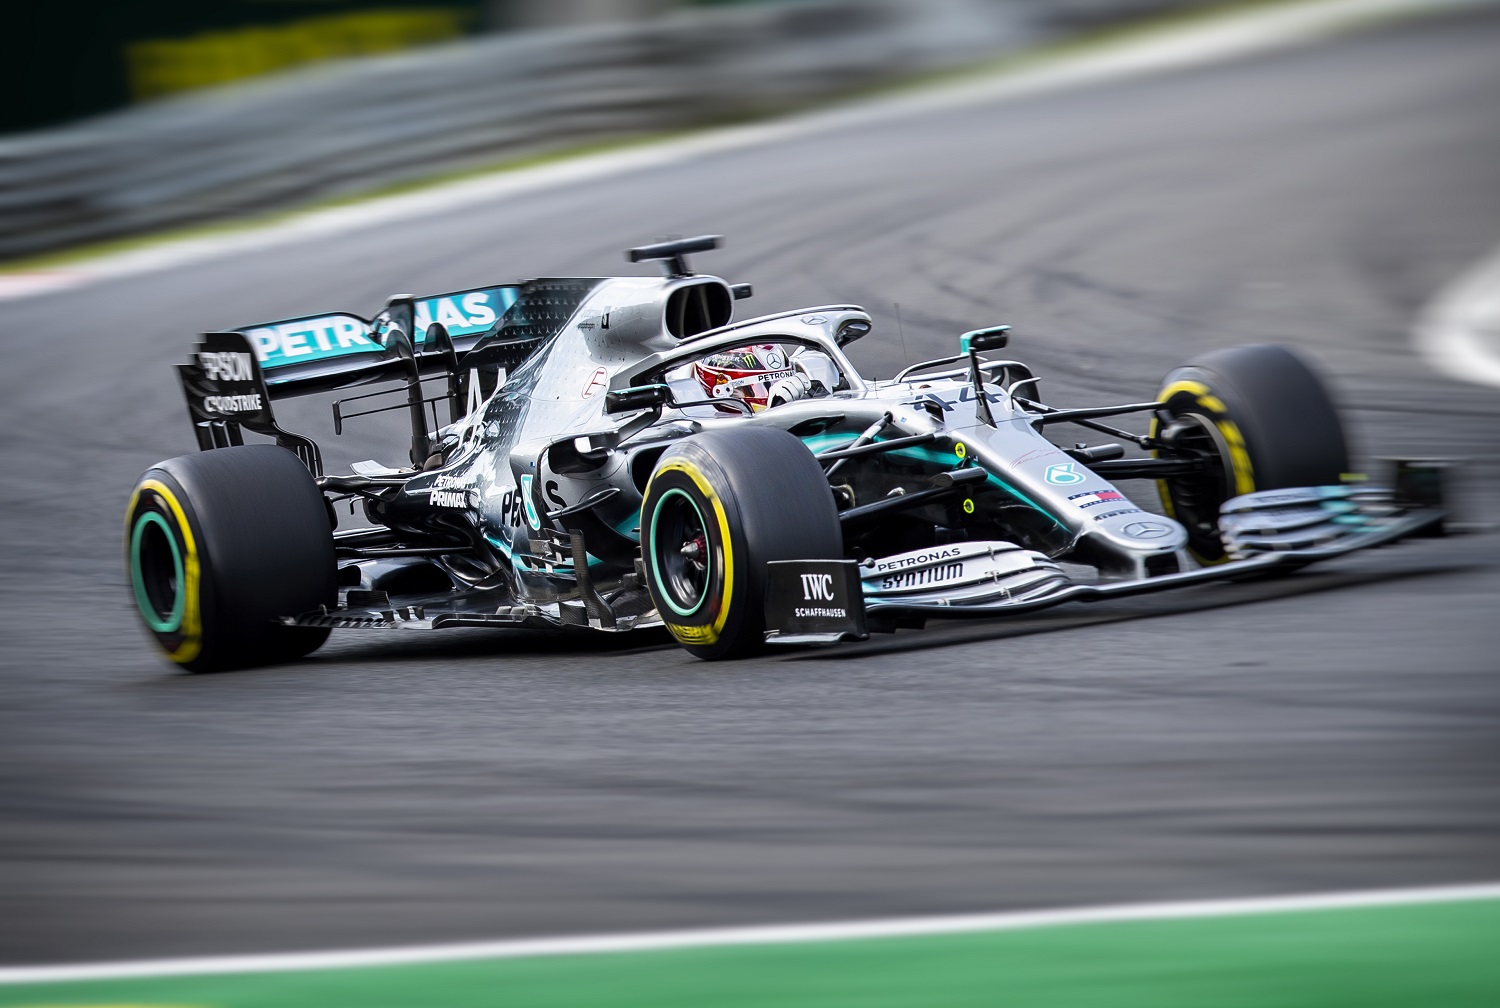 Lewis Hamilton of Great Britain driving the Silver Arrows version of the Mercedes AMG Petronas Formula 1 car during the Grand Prix of Hungary at Hungaroring on Aug. 4, 2019.